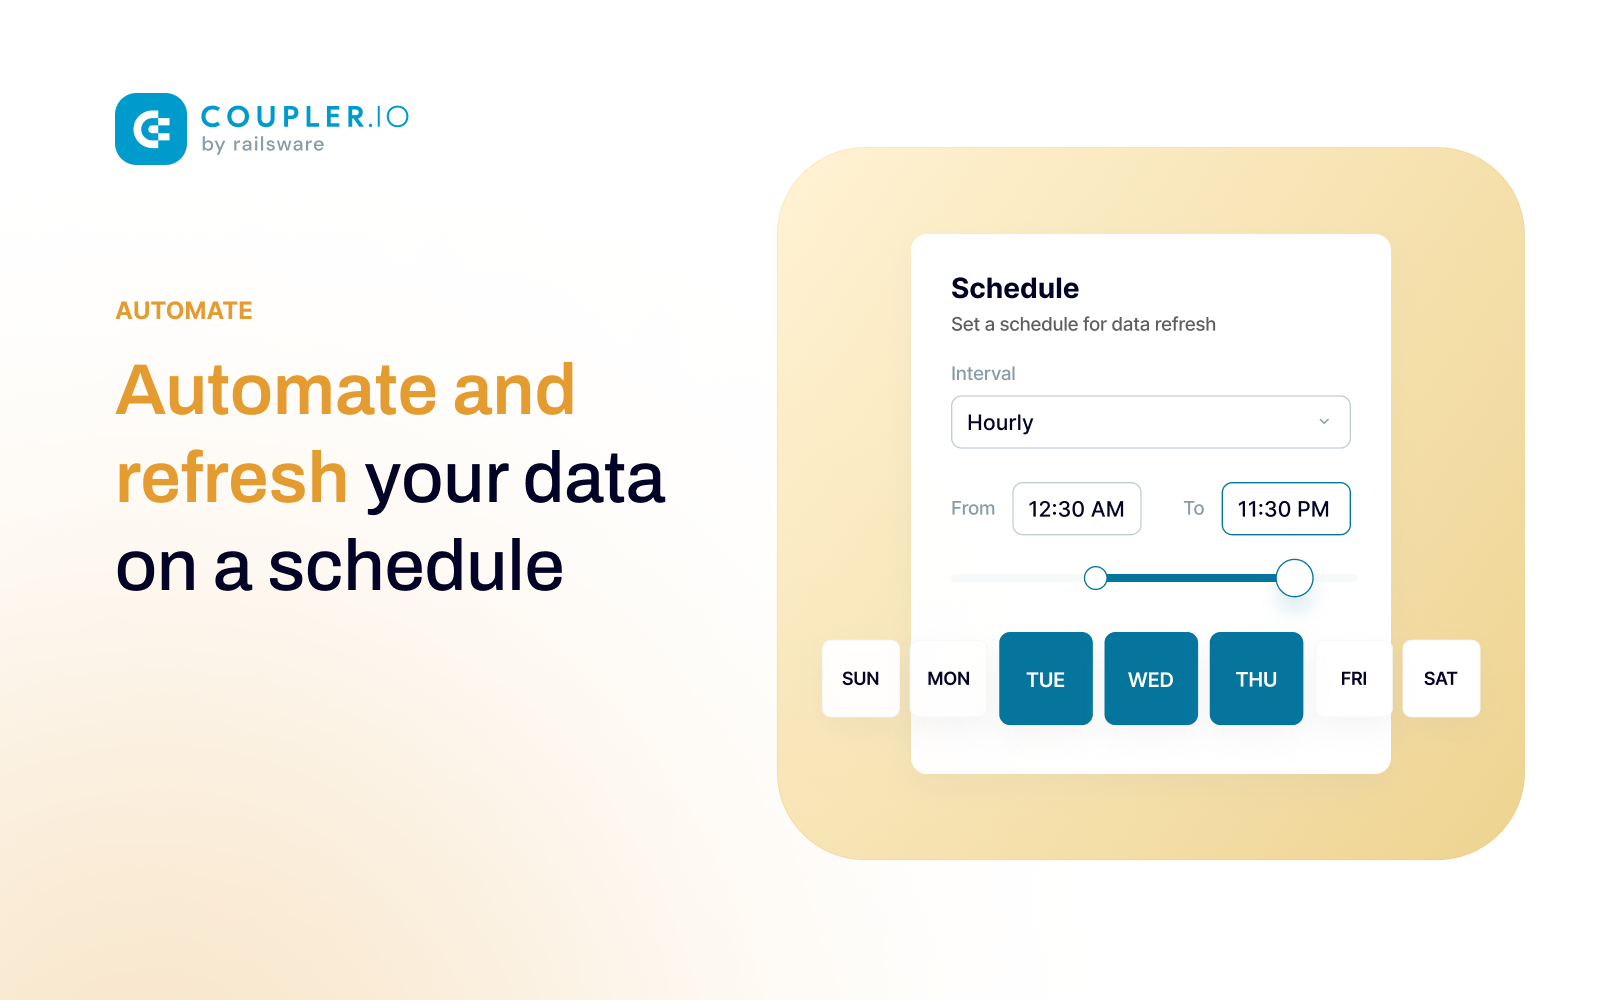 Automate and refresh your data on a schedule